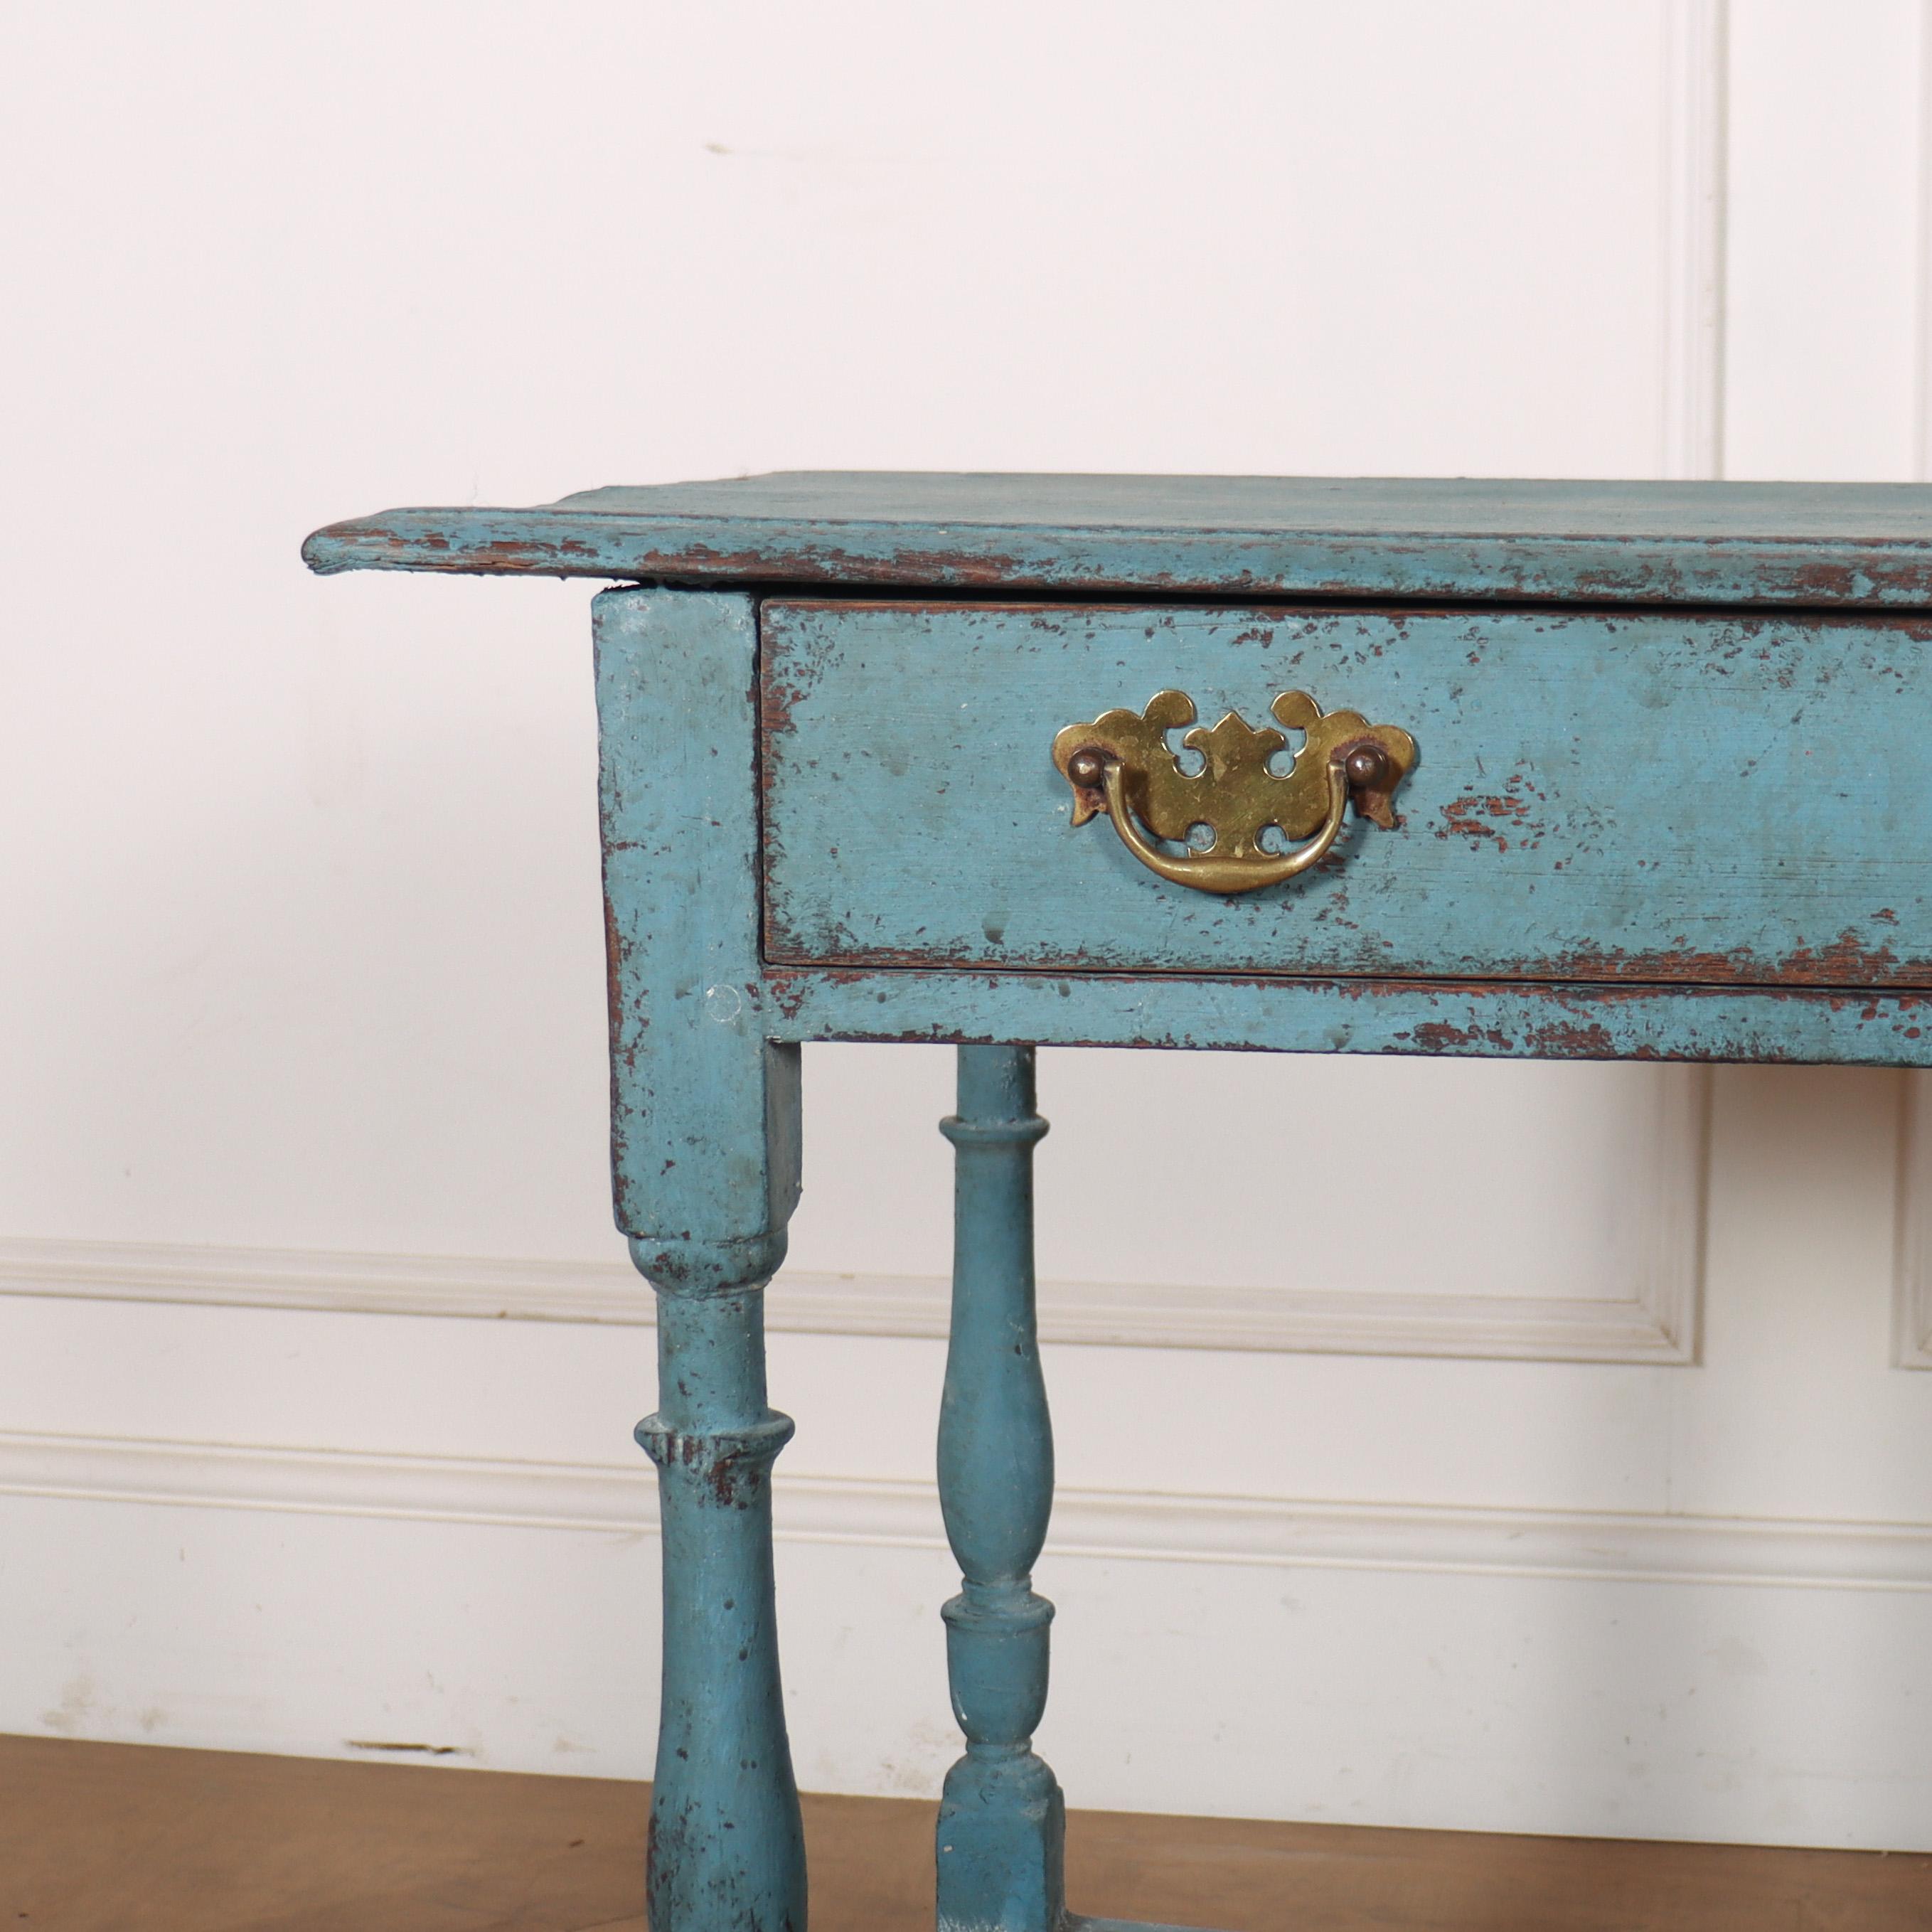 18th C English oak one drawer painted lamp table. 1760.

Reference: 8292

Dimensions
30 inches (76 cms) Wide
18.5 inches (47 cms) Deep
28 inches (71 cms) High